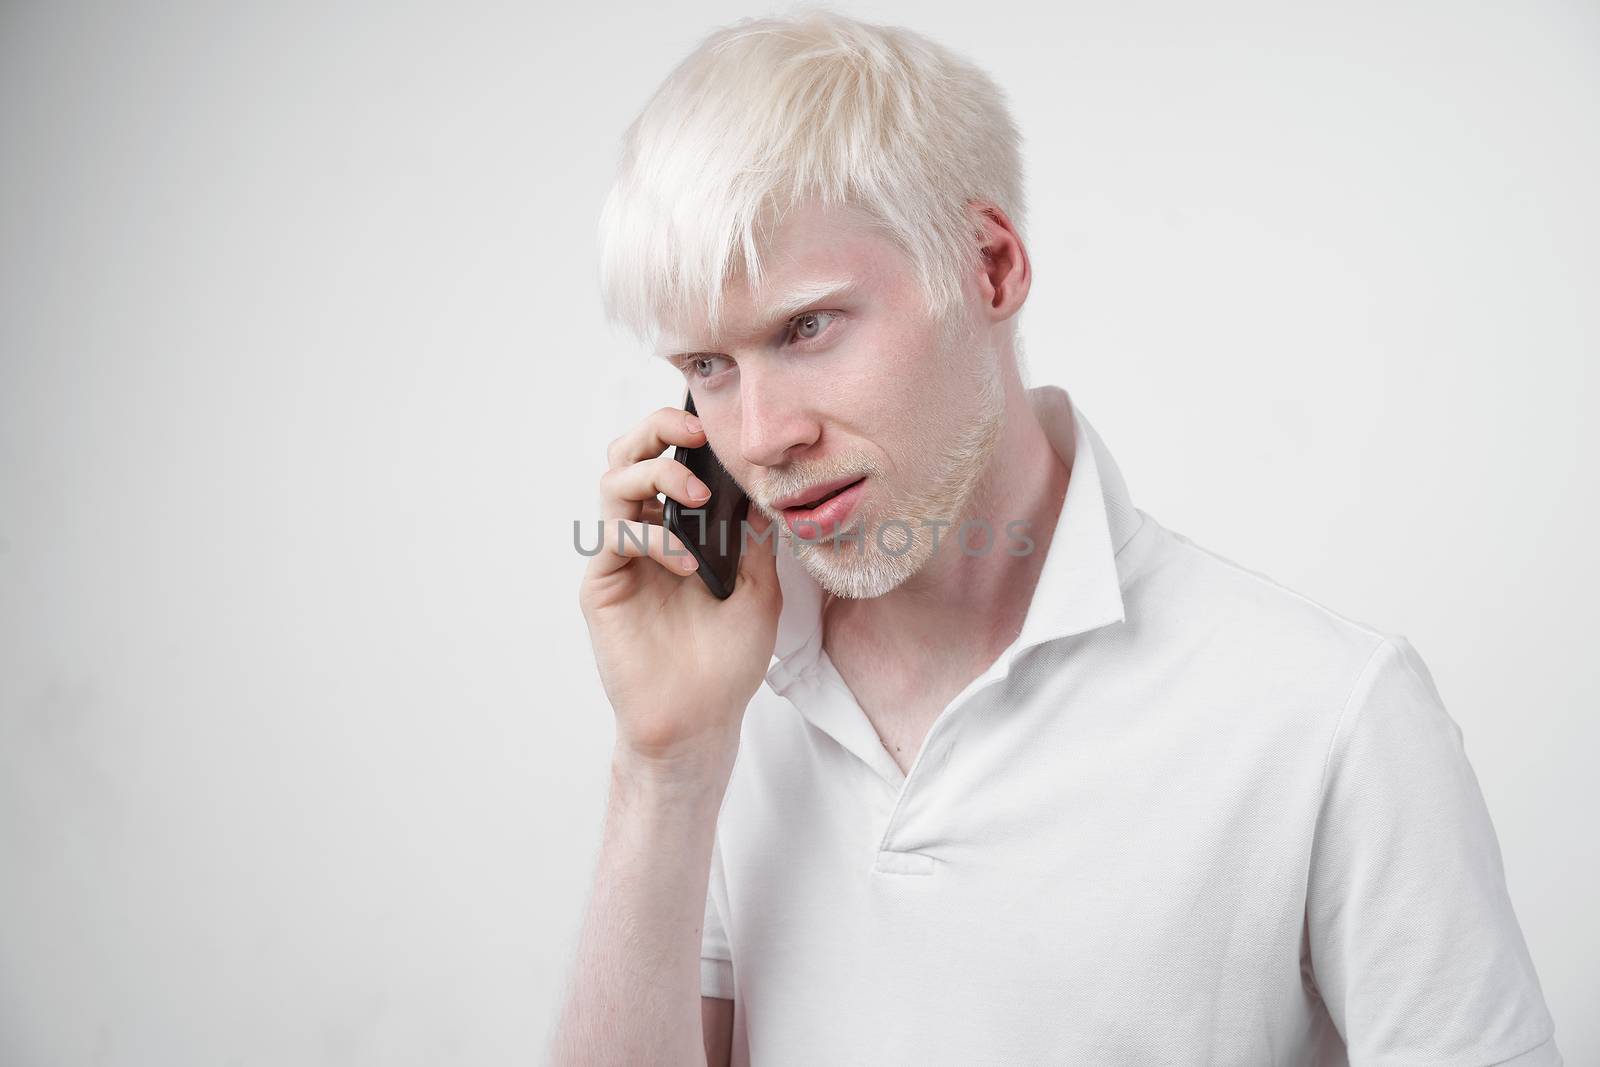 albinism albino man white skin hair studio dressed t-shirt isolated white background abnormal deviations unusual appearance abnormality Beautiful people Talking on the phone.